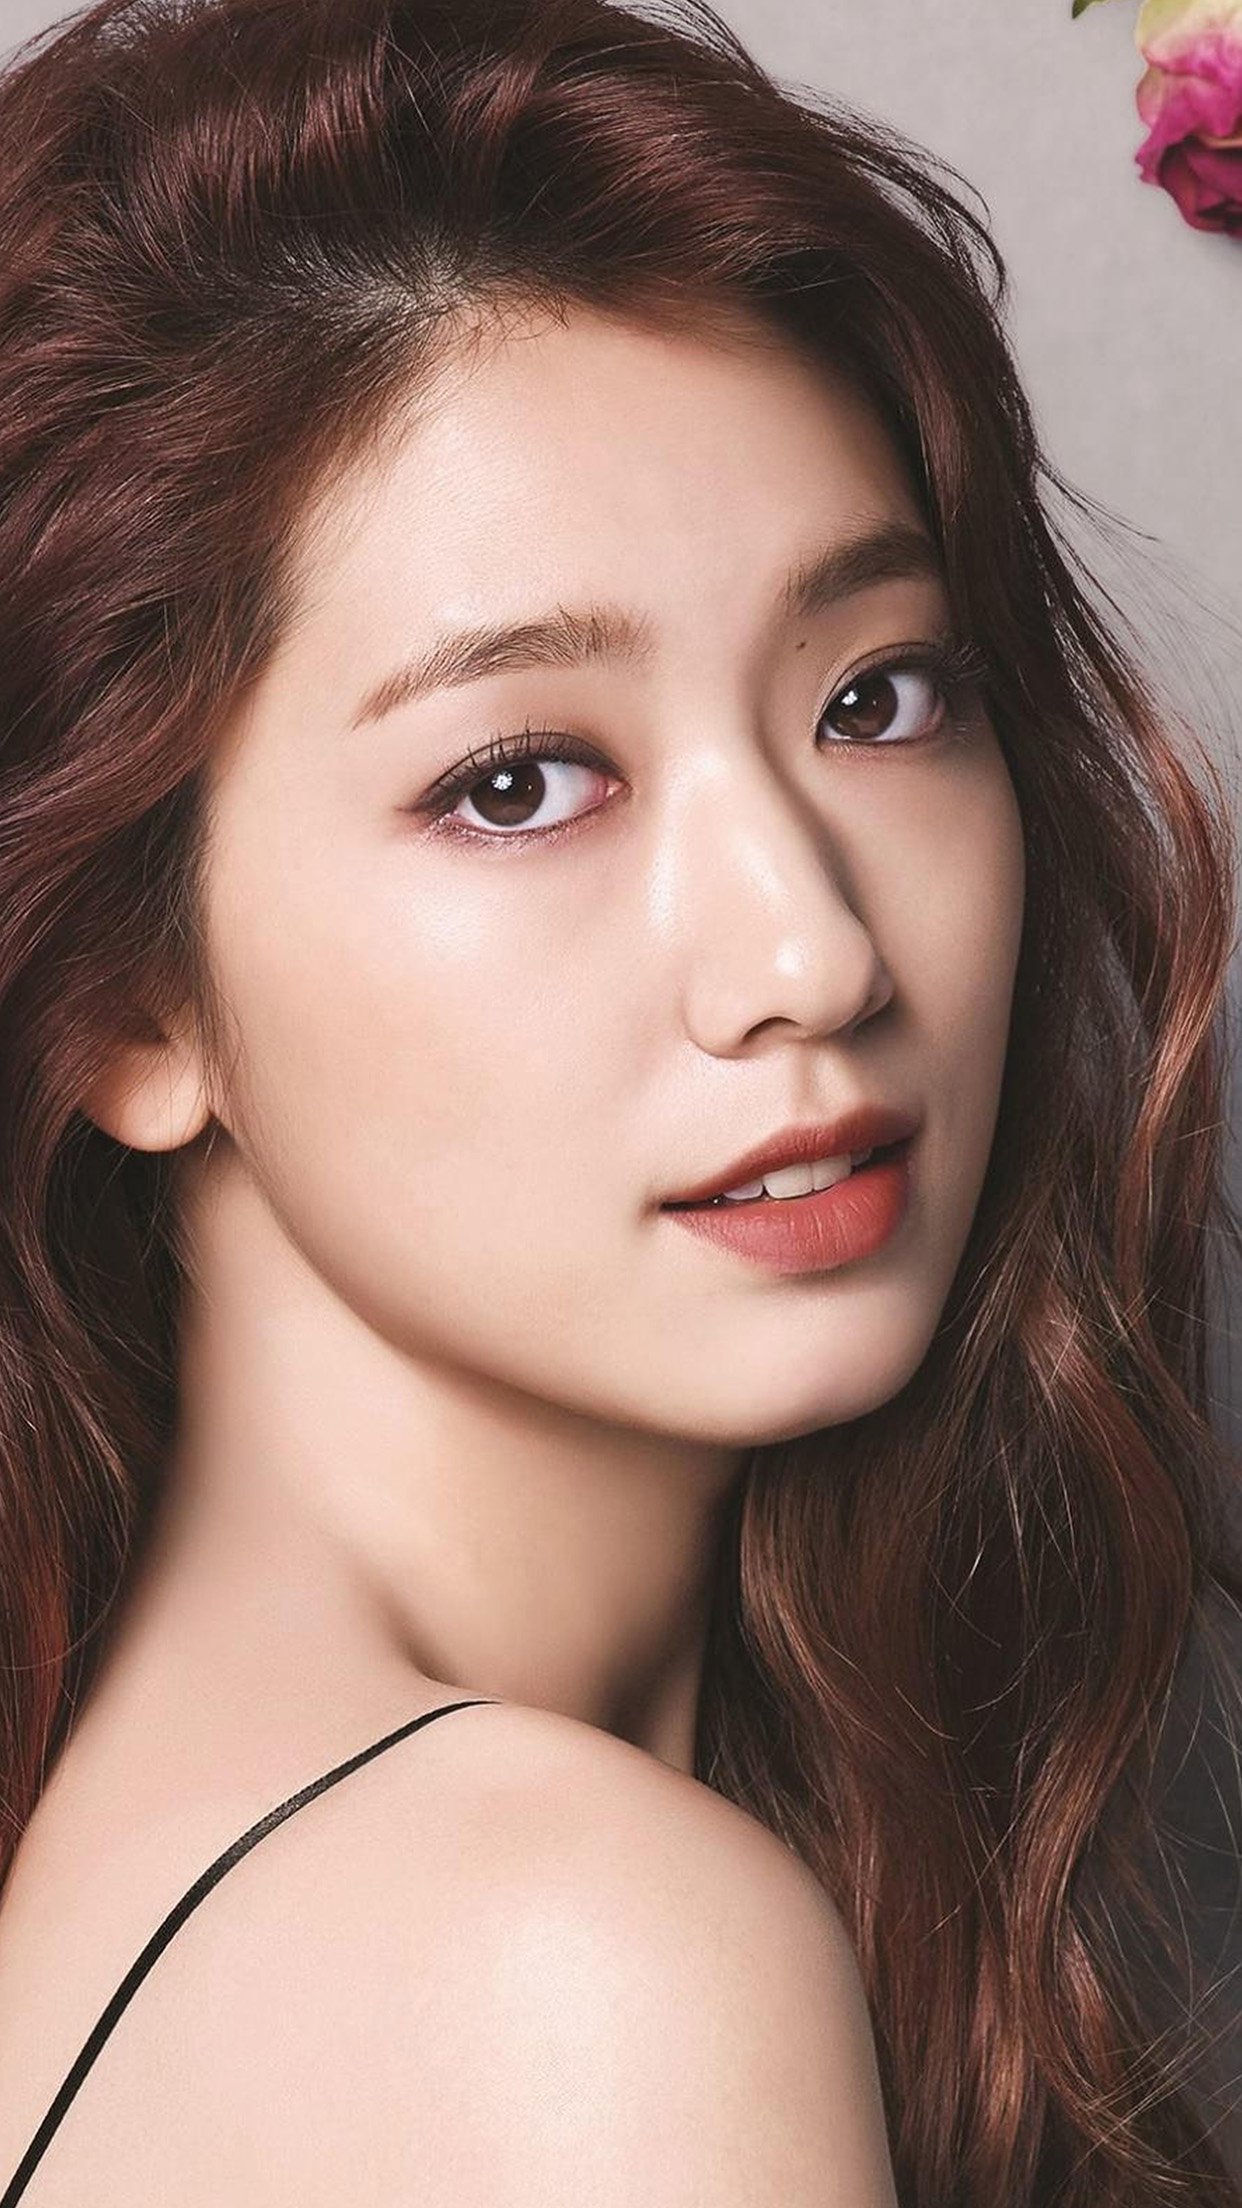 Shinhye Park Kpop Actress Celebrity Flower Android wallpaper